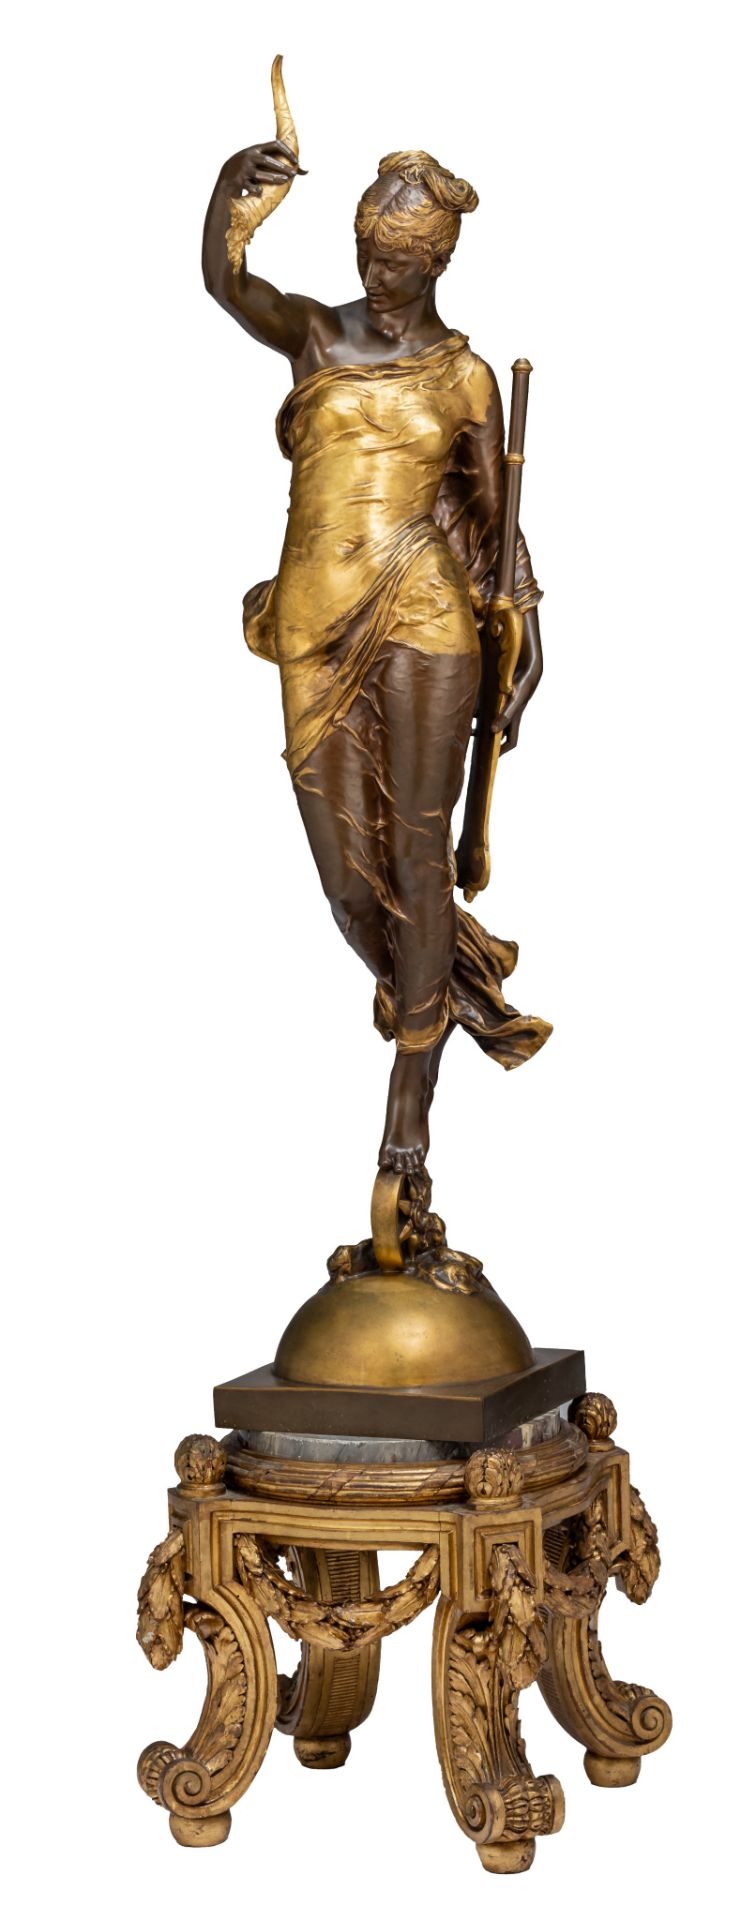 Paul Moreau-Vauthier (1871-1936), 'Fortuna', 1878, gilt and patinated bronze on a matching pedestal,